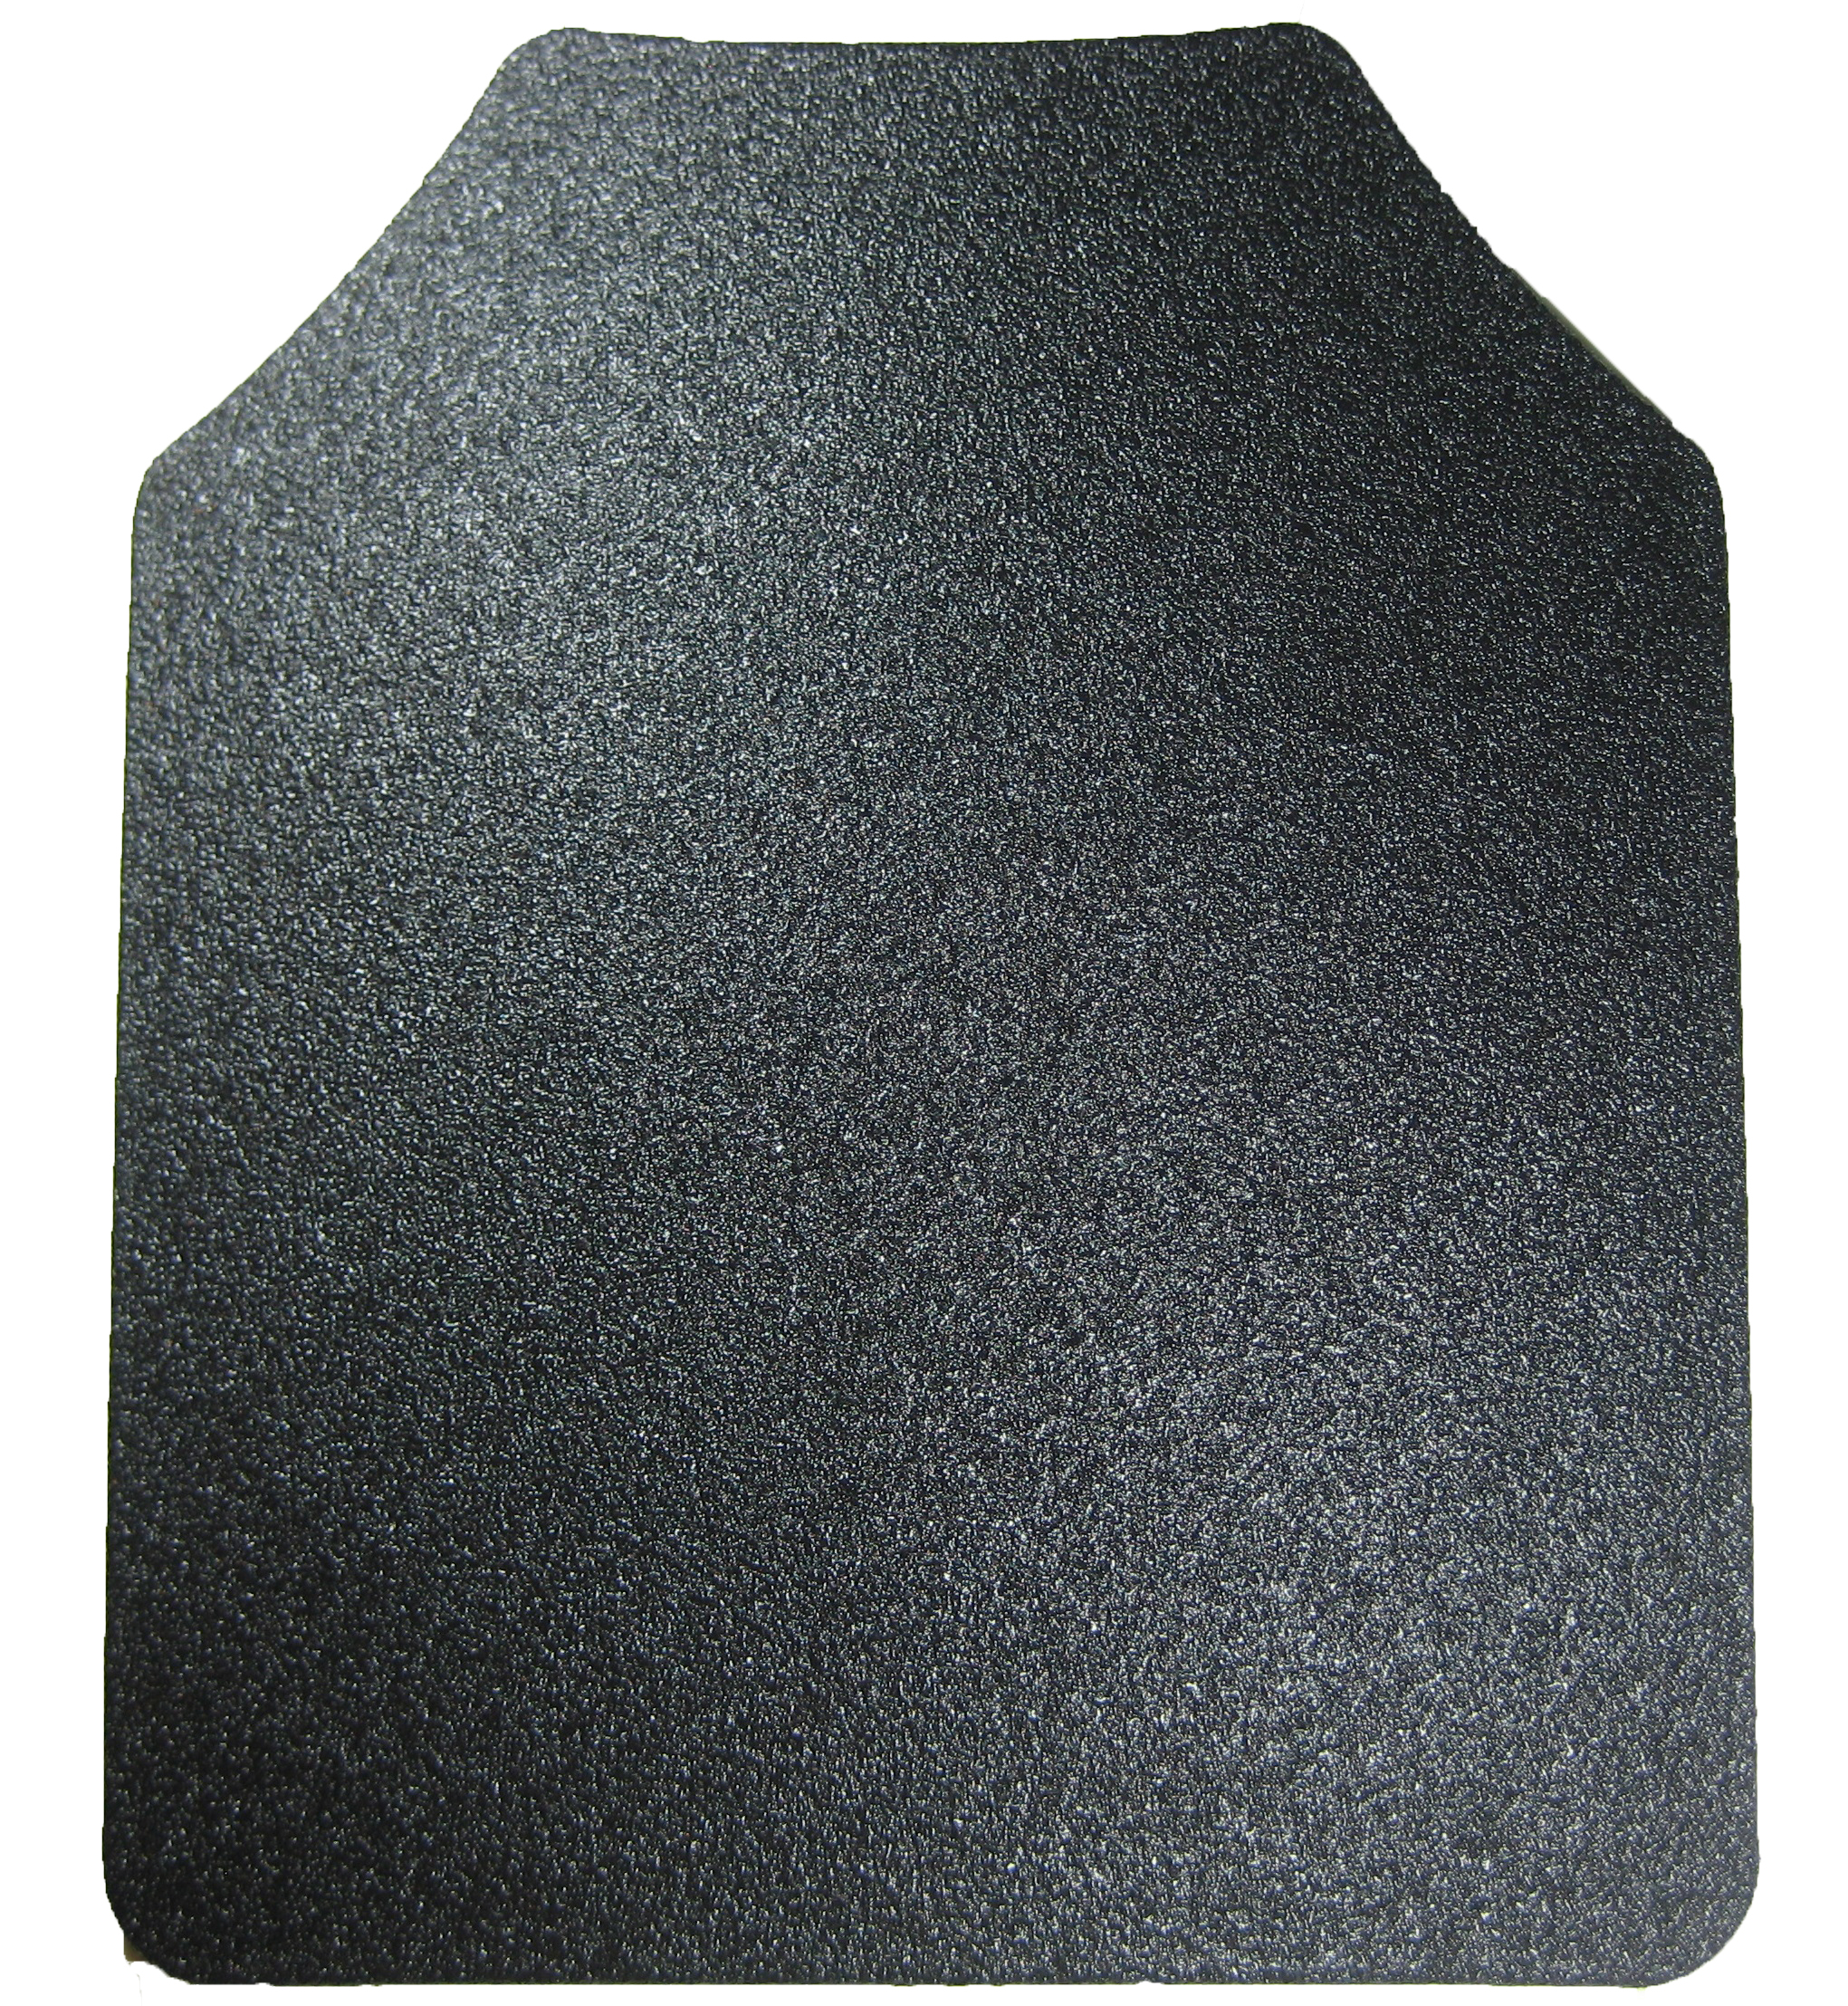 AR500 Armor Level III Curved Shooters Cut Steel Plate